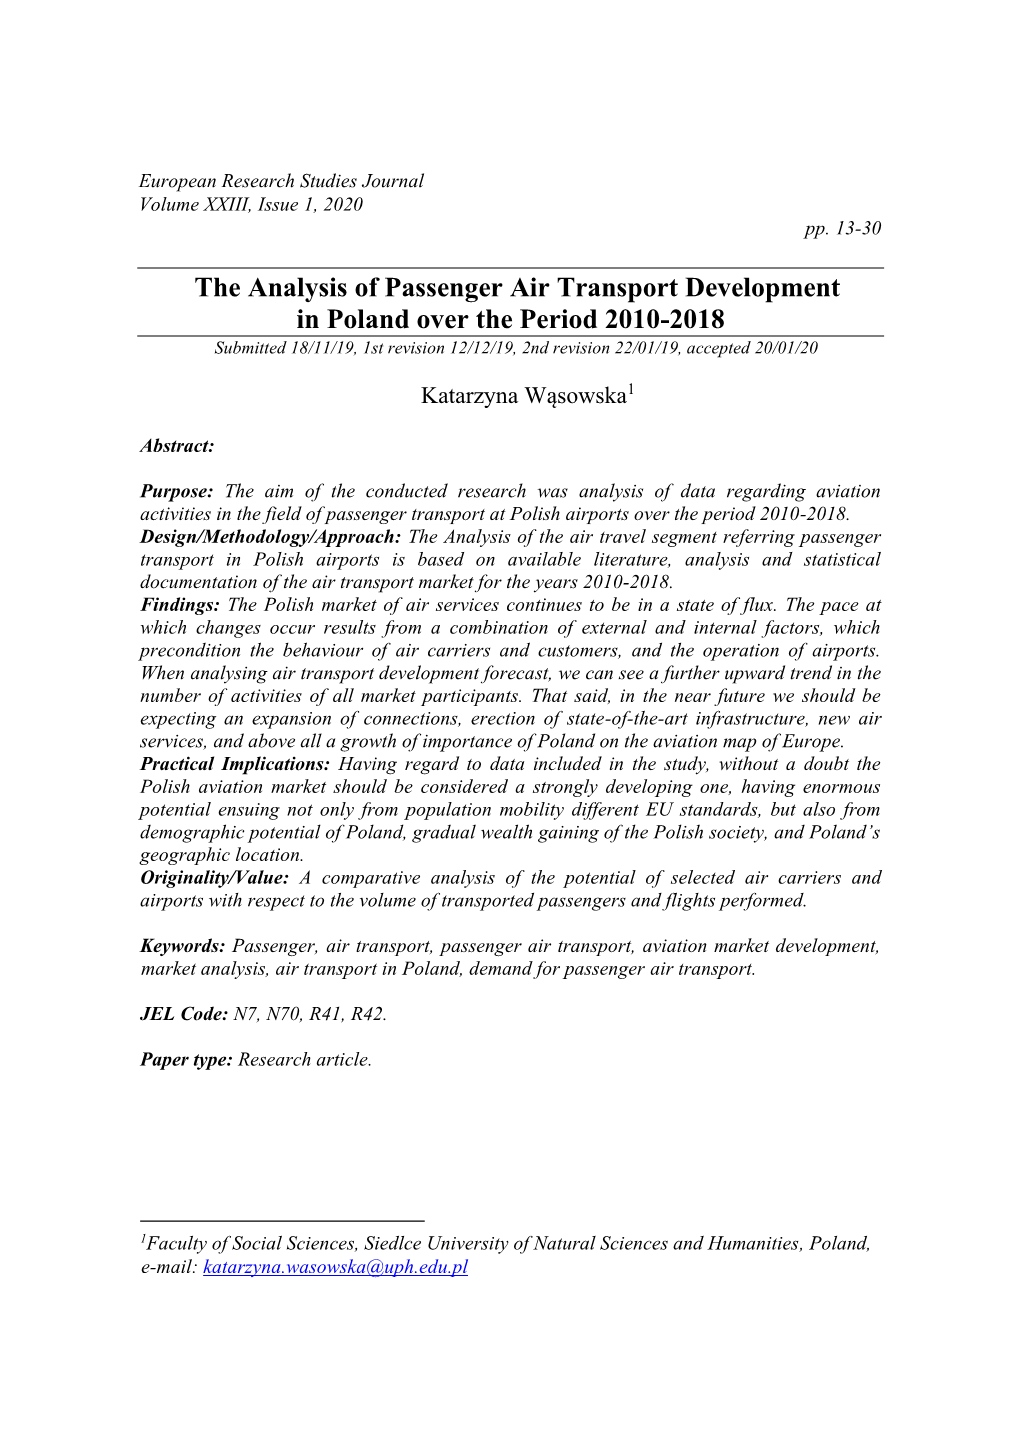 The Analysis of Passenger Air Transport Development in Poland Over the Period 2010-2018